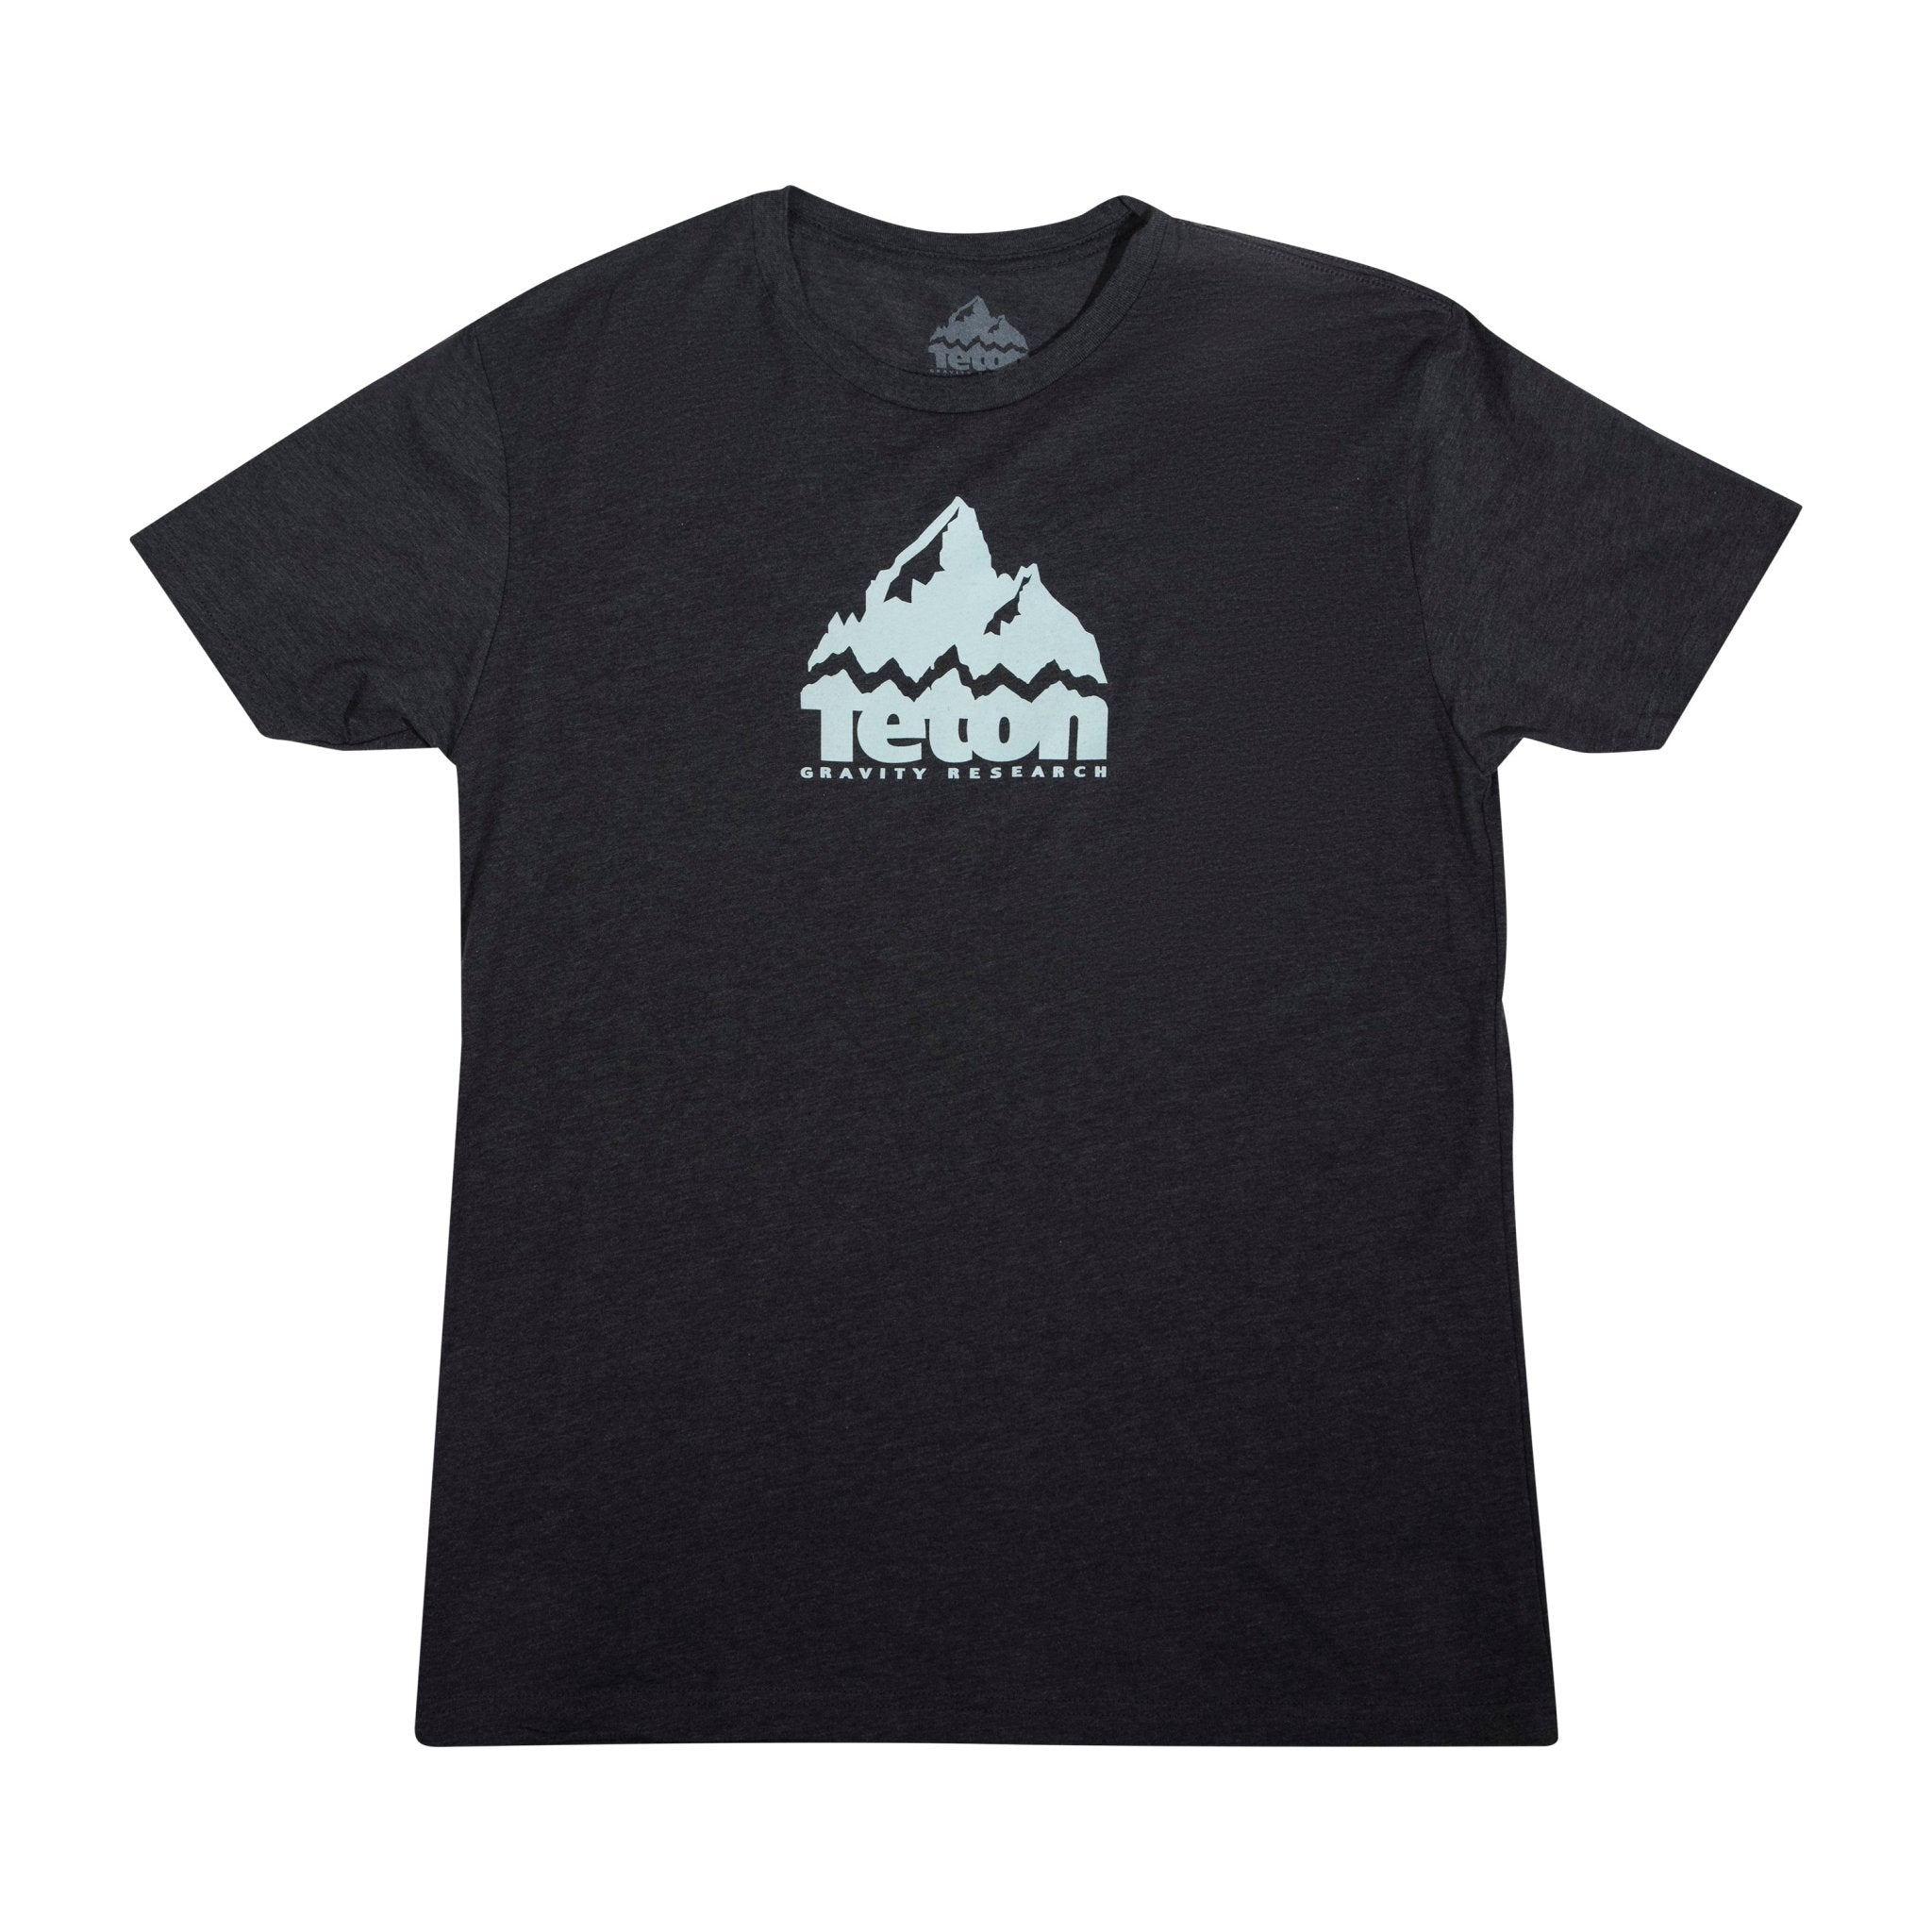 Grand Logo Tee with the Teton Gravity Research logo on the chest in charcoal, logo white